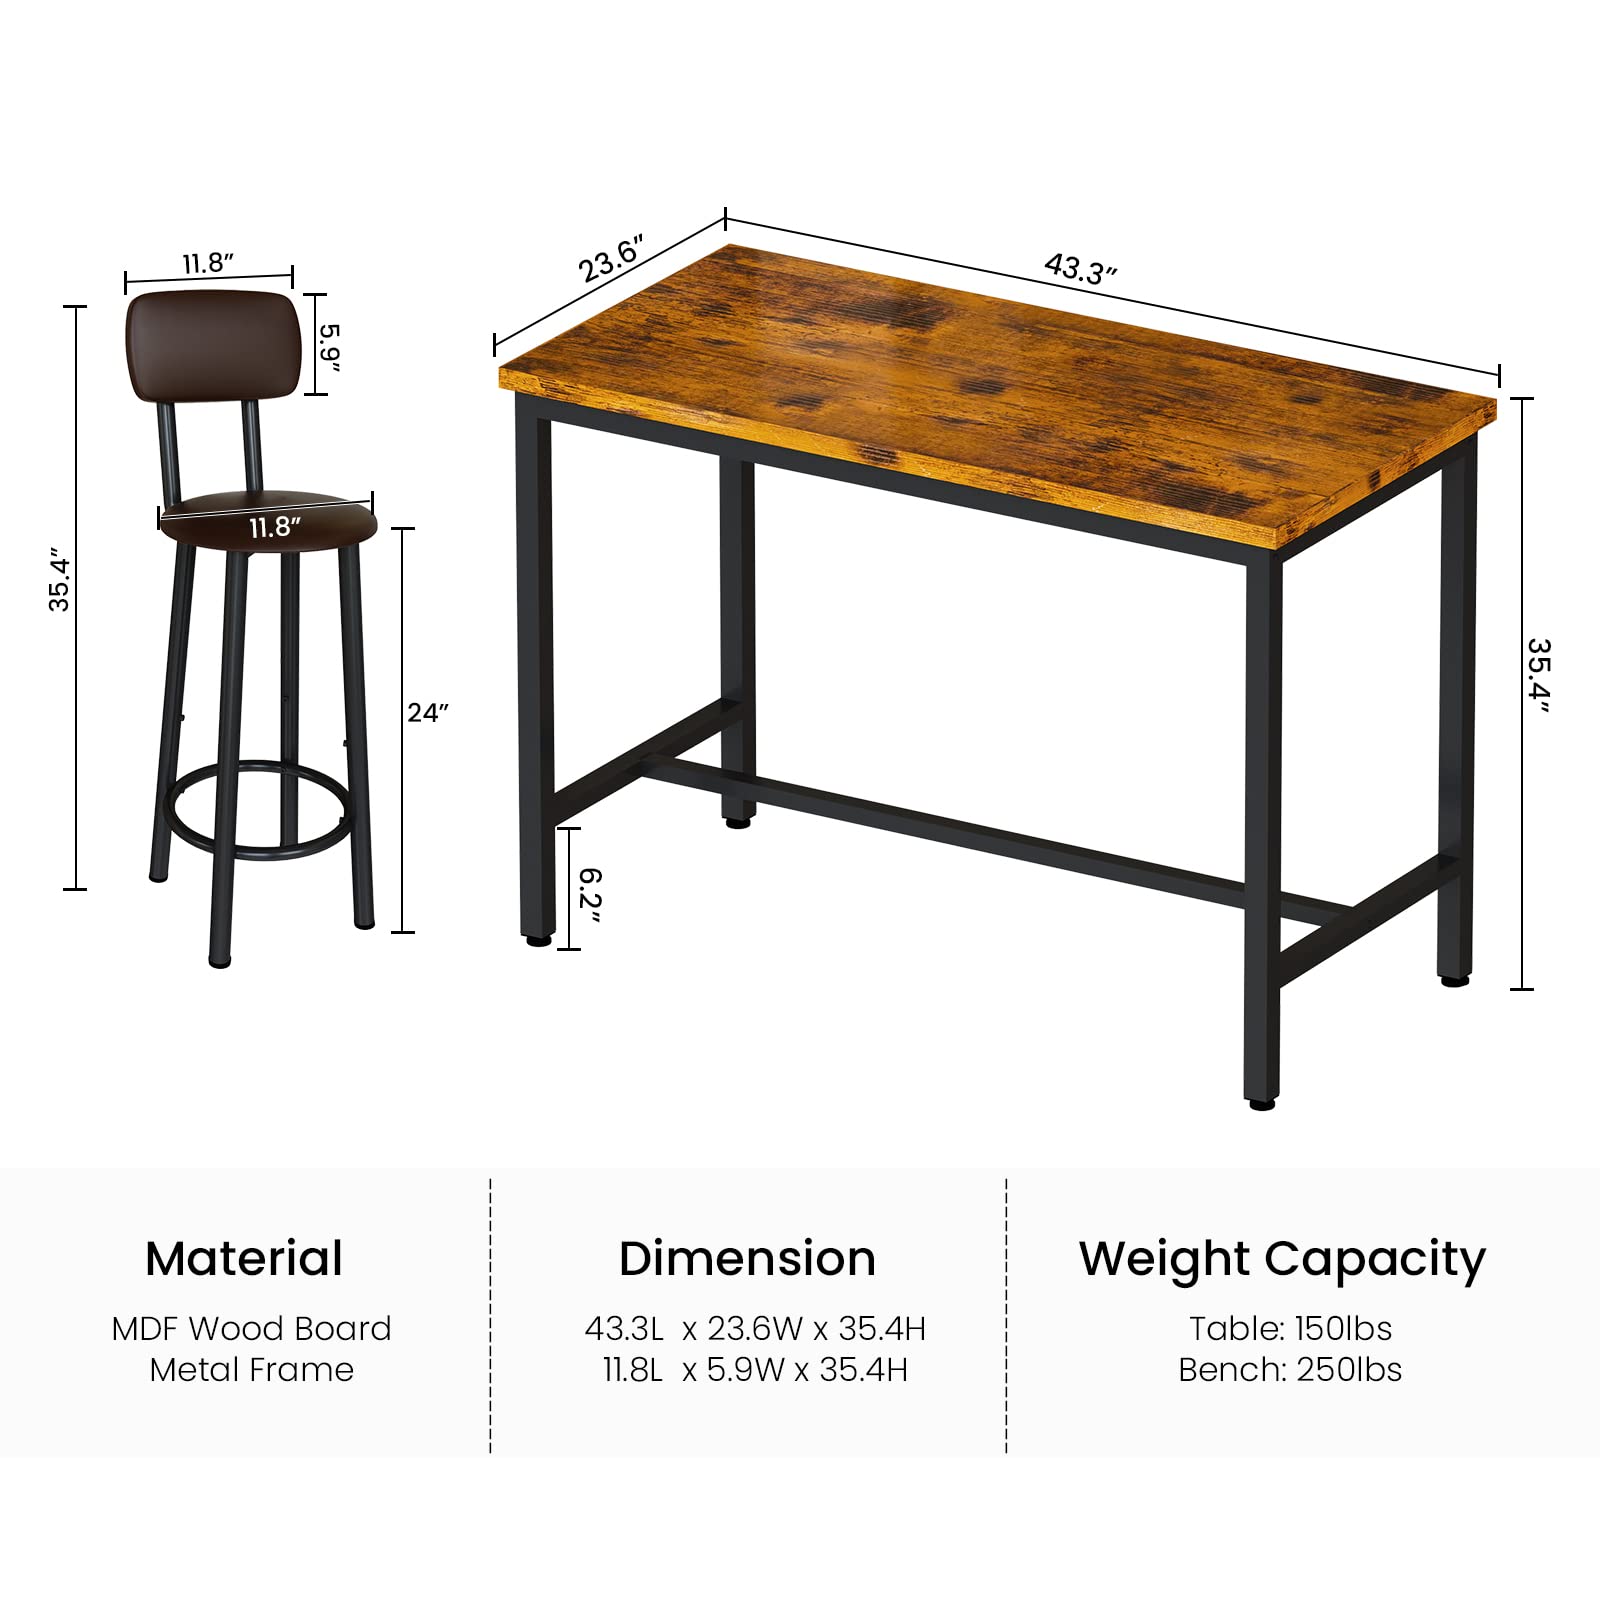 AWQM Bar Table and 4 Chairs Set Industrial Counter Height Pub Table with Bar 5 Pieces Dining Set Home Kitchen Breakfast, PU Upholstered Stools with Backrest, Rustic Brown